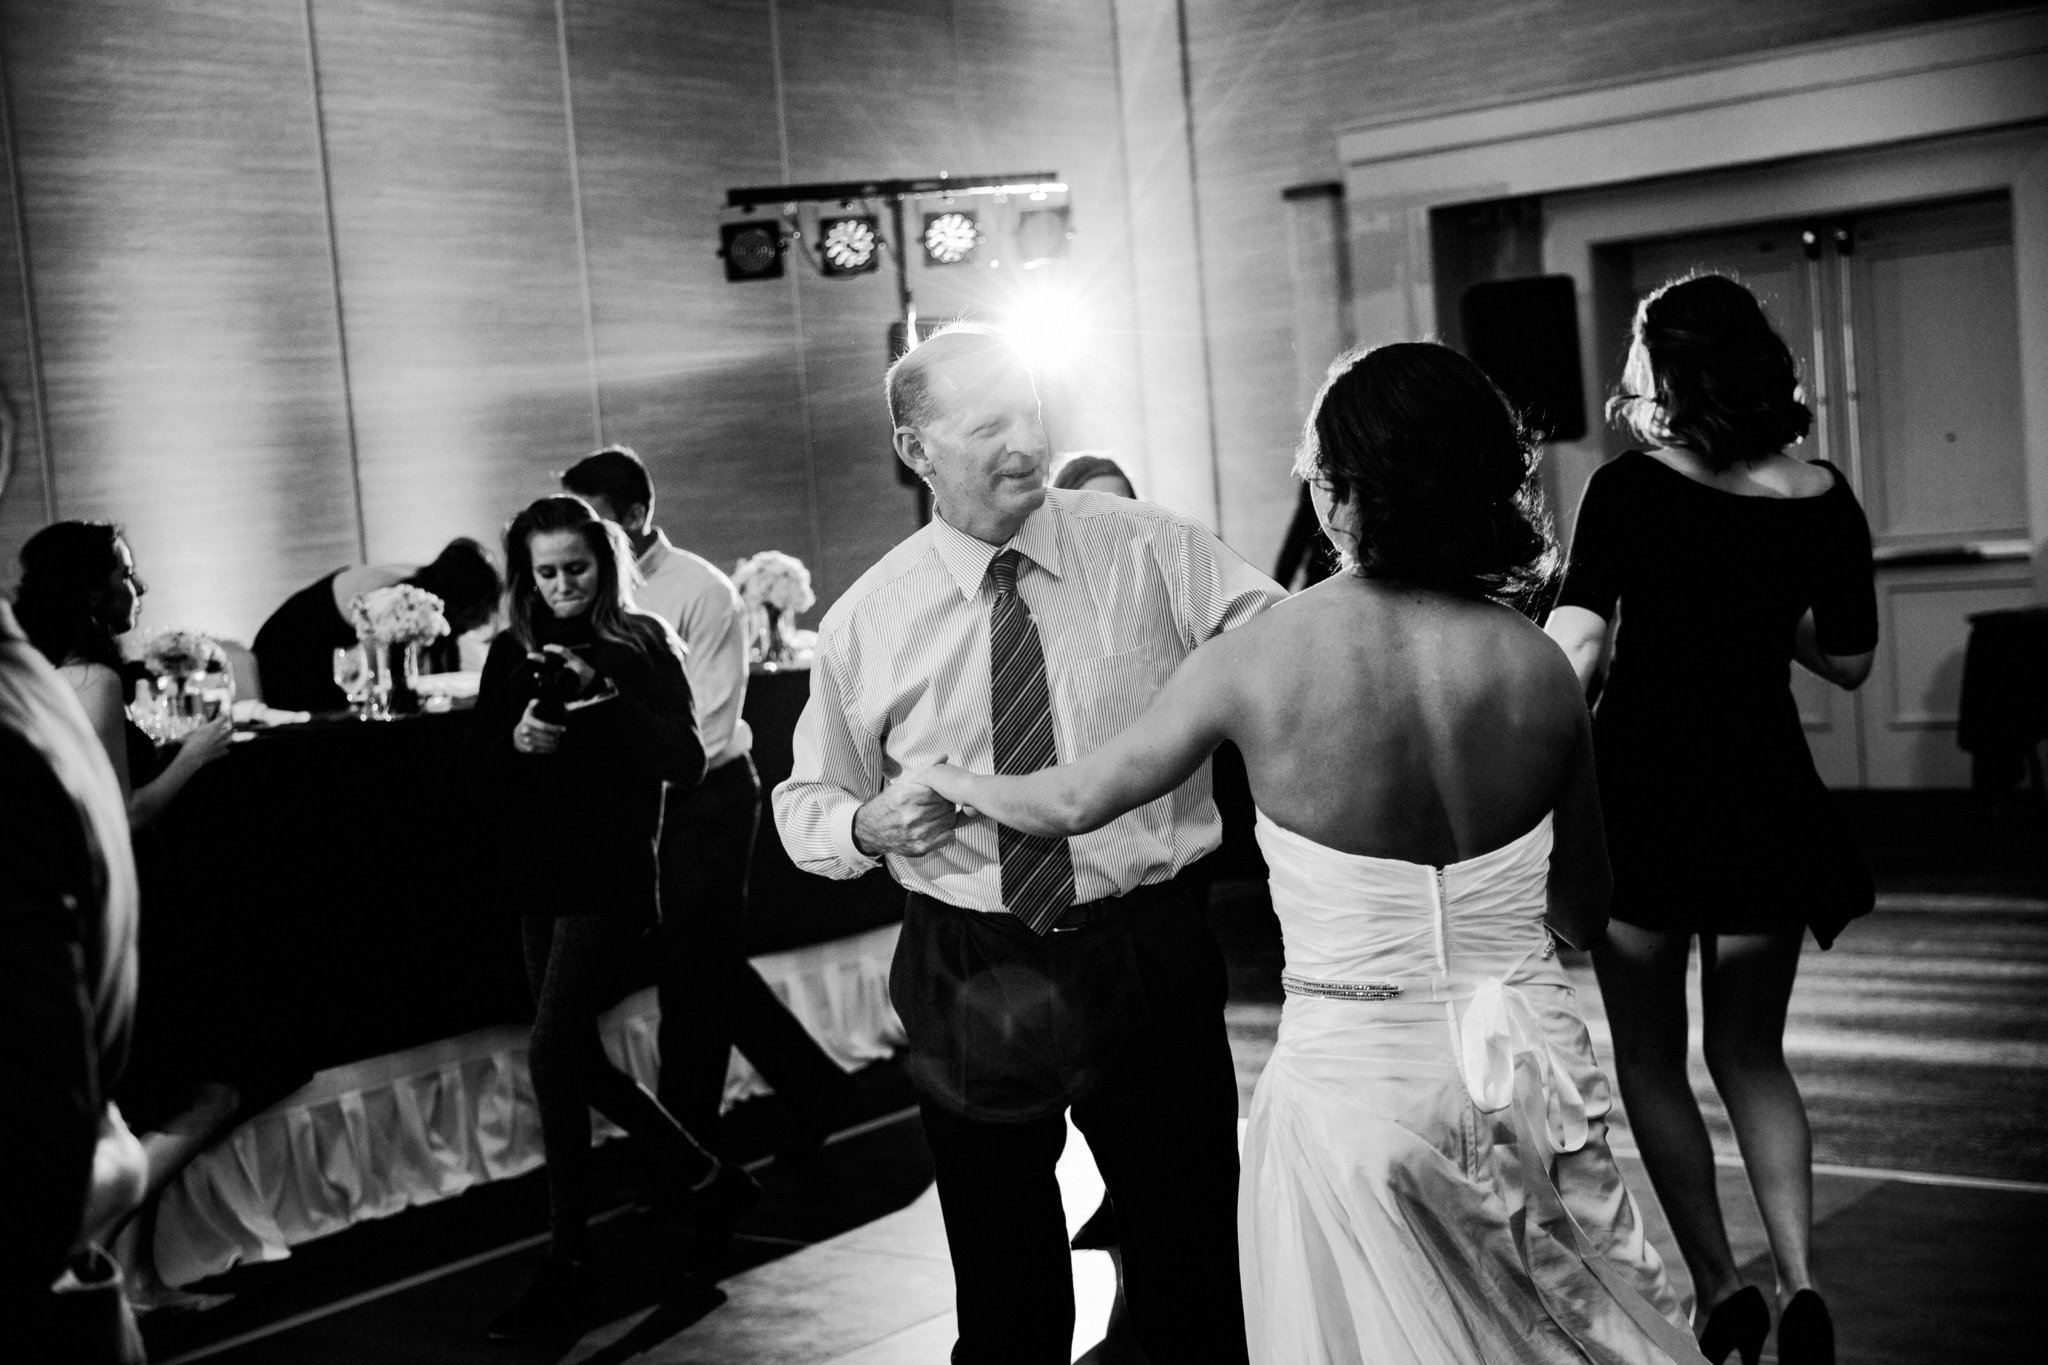 black and white | wedding | wedding photos | wedding photography | images by feliciathephotographer.com | Country Club Plaza | Kansas City | The Marriott | Unity Temple | reception venue | reception activities | dance floor | candid | guests dancing | Jukeboxx Media | dancing bride | dancing father of the bride | father daughter dance 